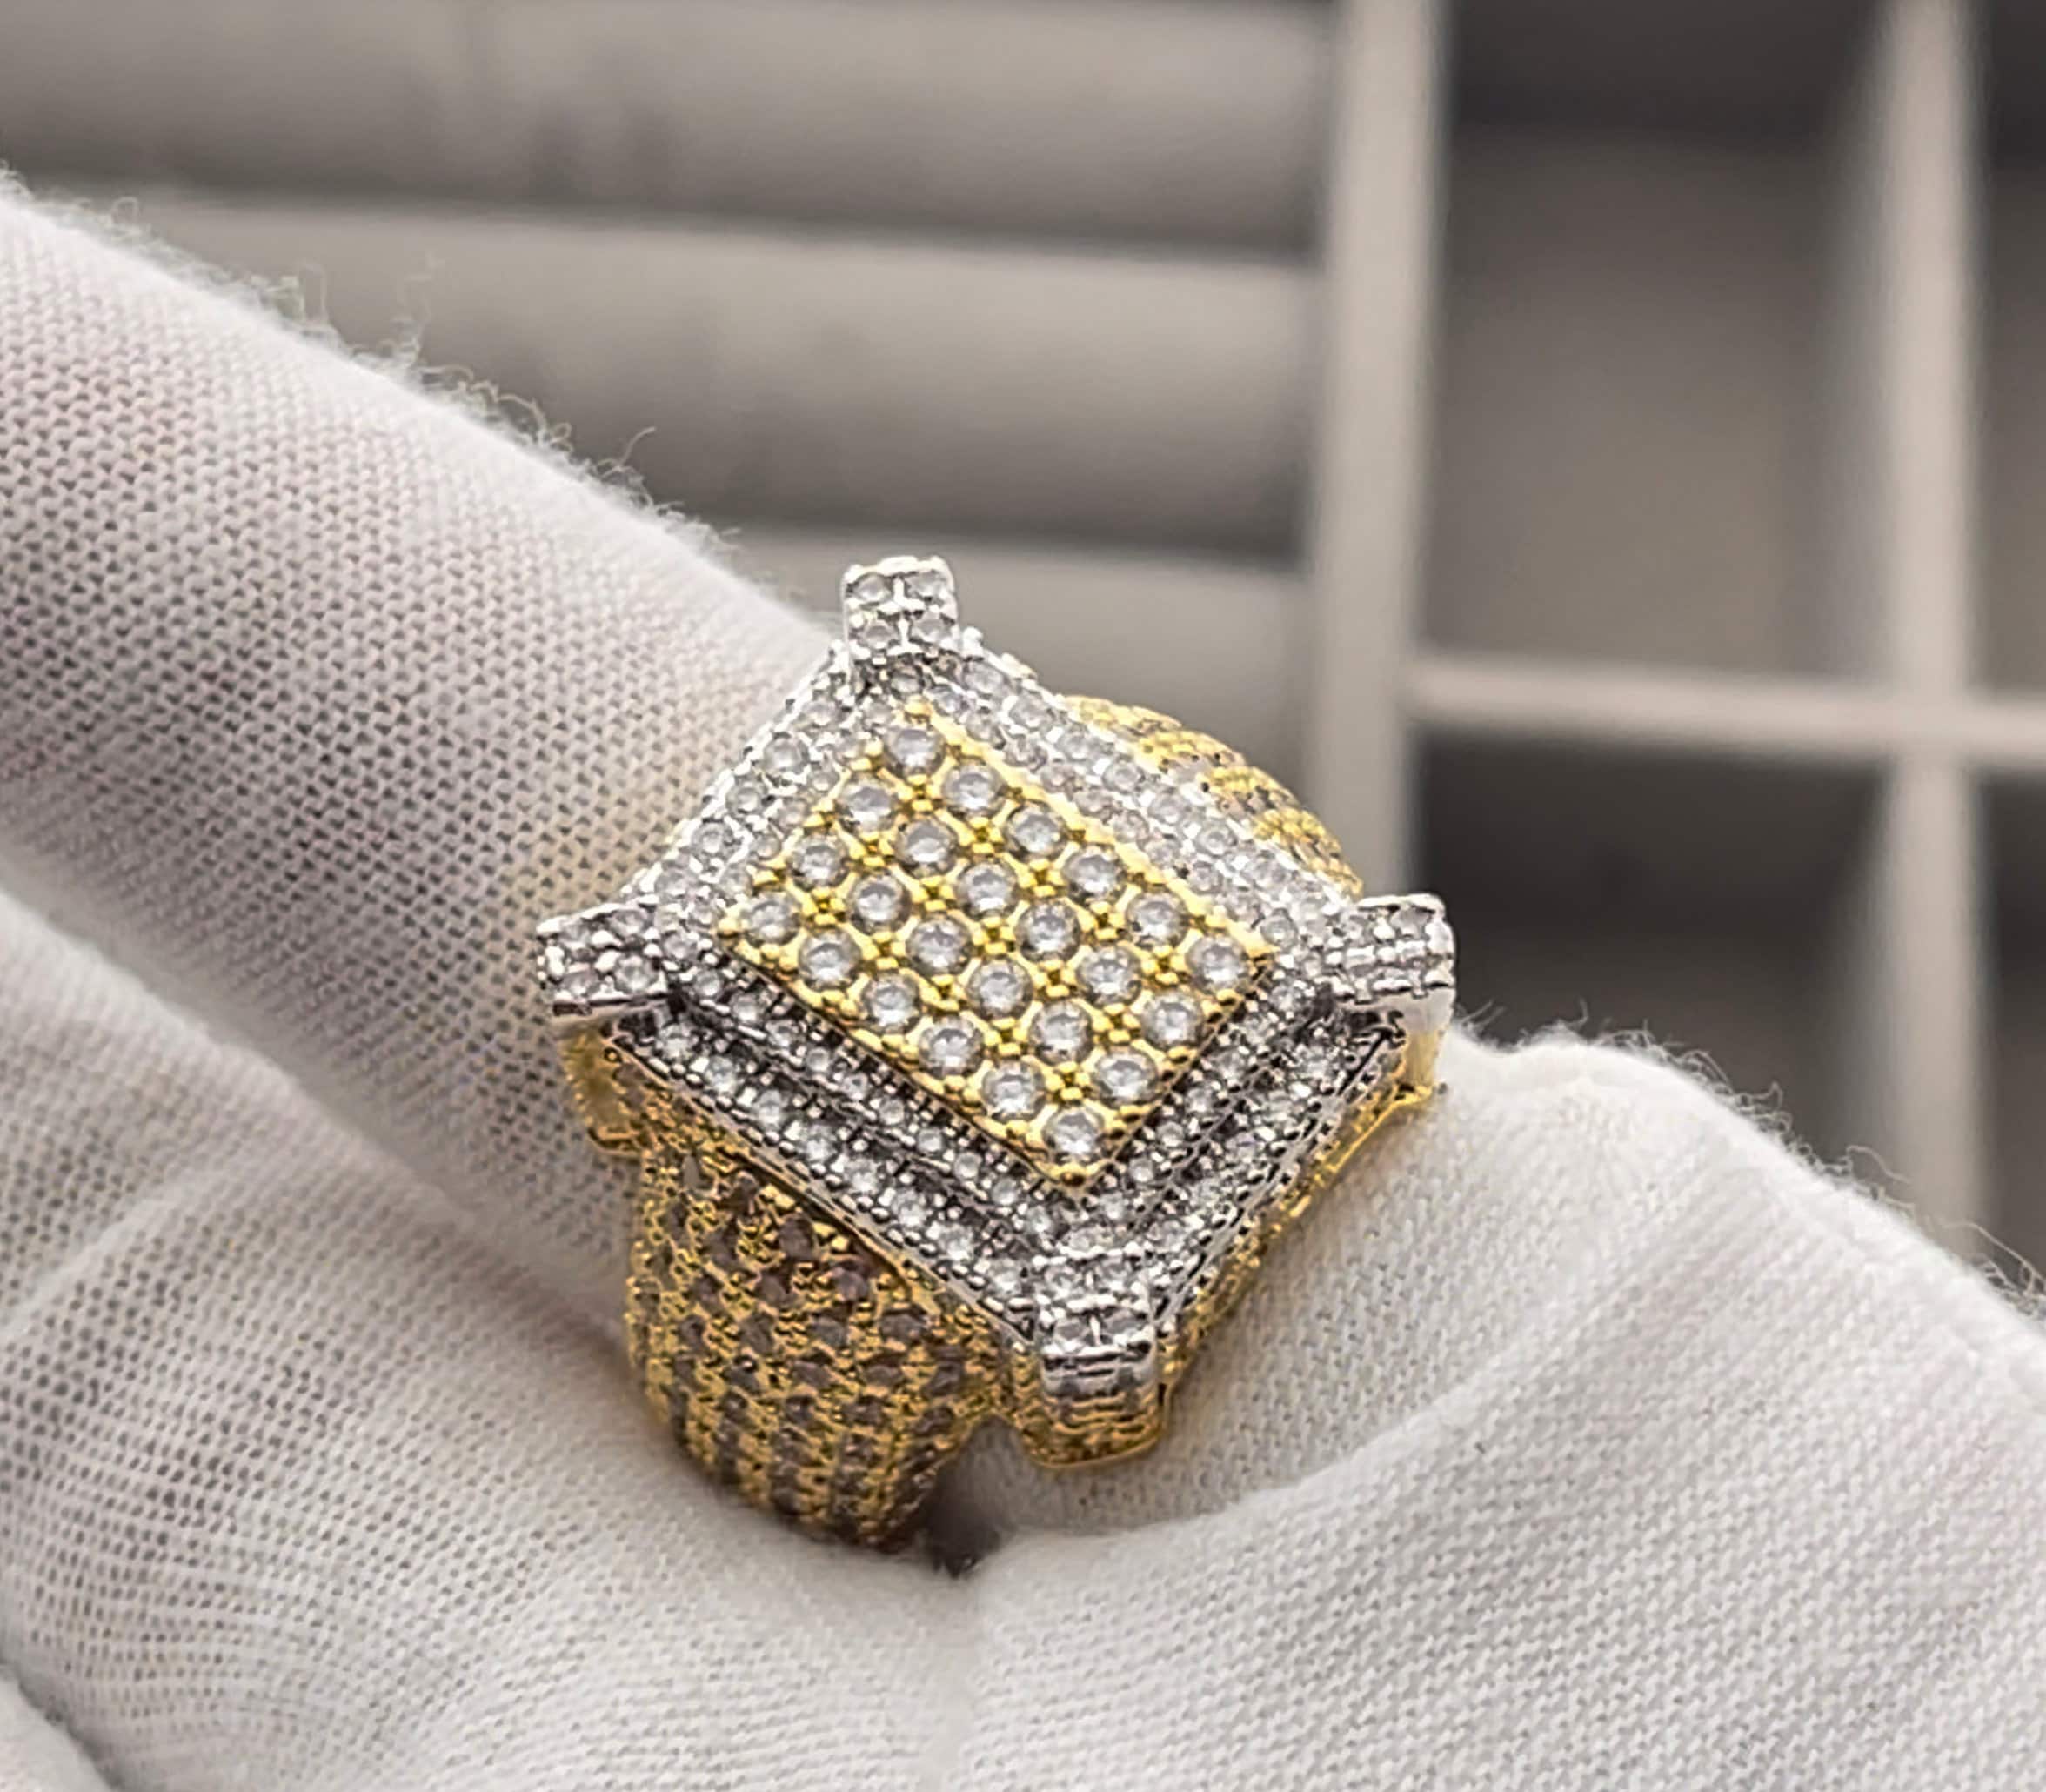 Mens 11mm Classic Big Pave Diamond Ring Gold Ring With 18k True Gold Fill  Microset Lab Pave Diamond Ring Hip Hop Style From Wyd998, $30.55 |  DHgate.Com